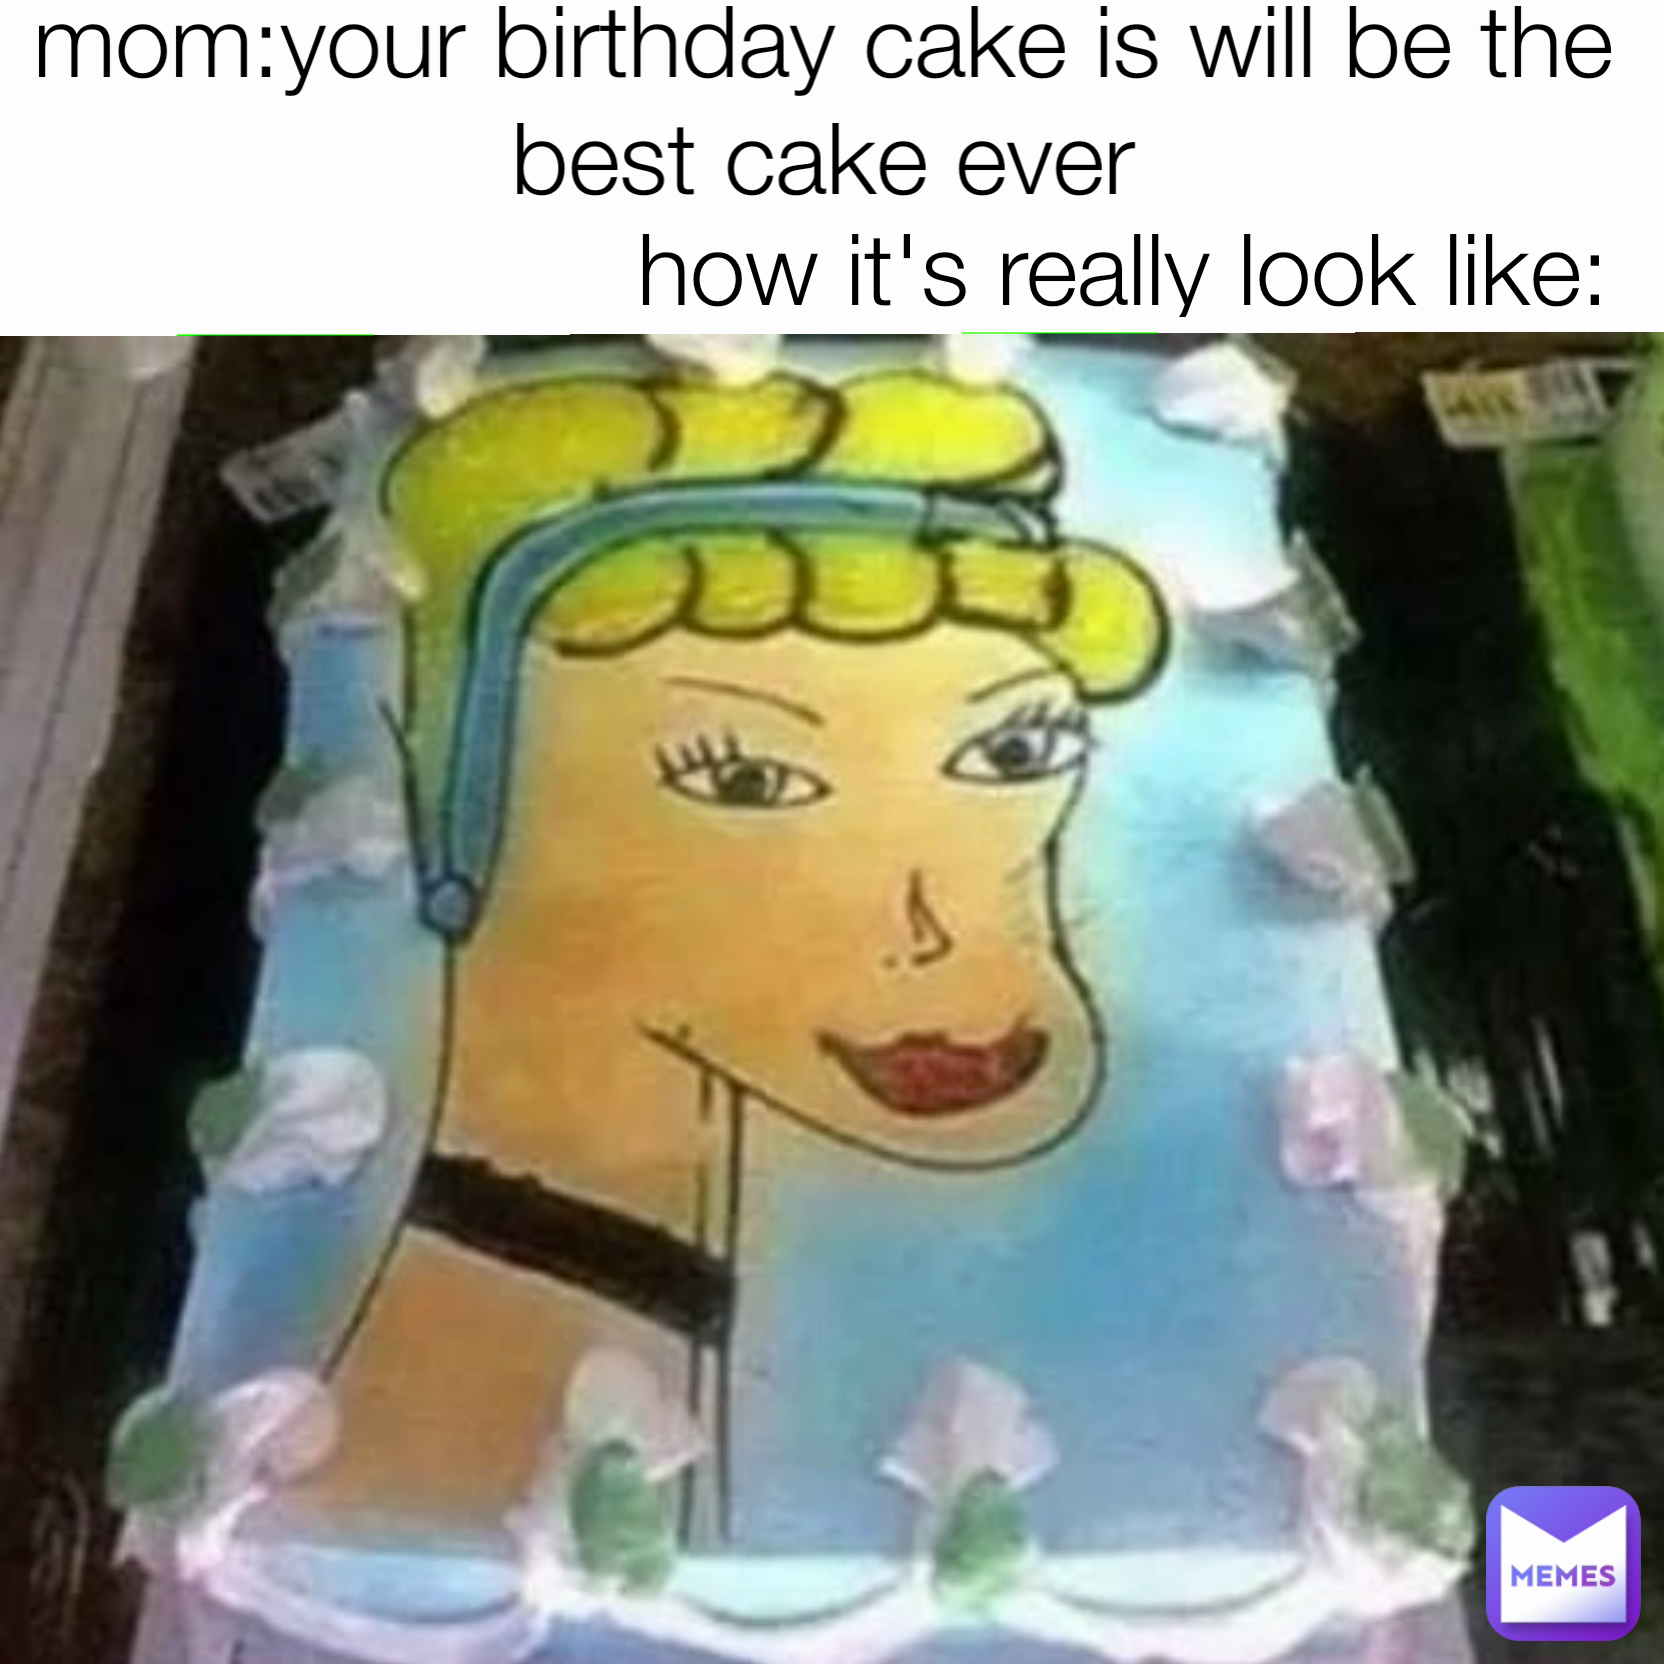 how it's really look like: mom:your birthday cake is will be the best cake ever
